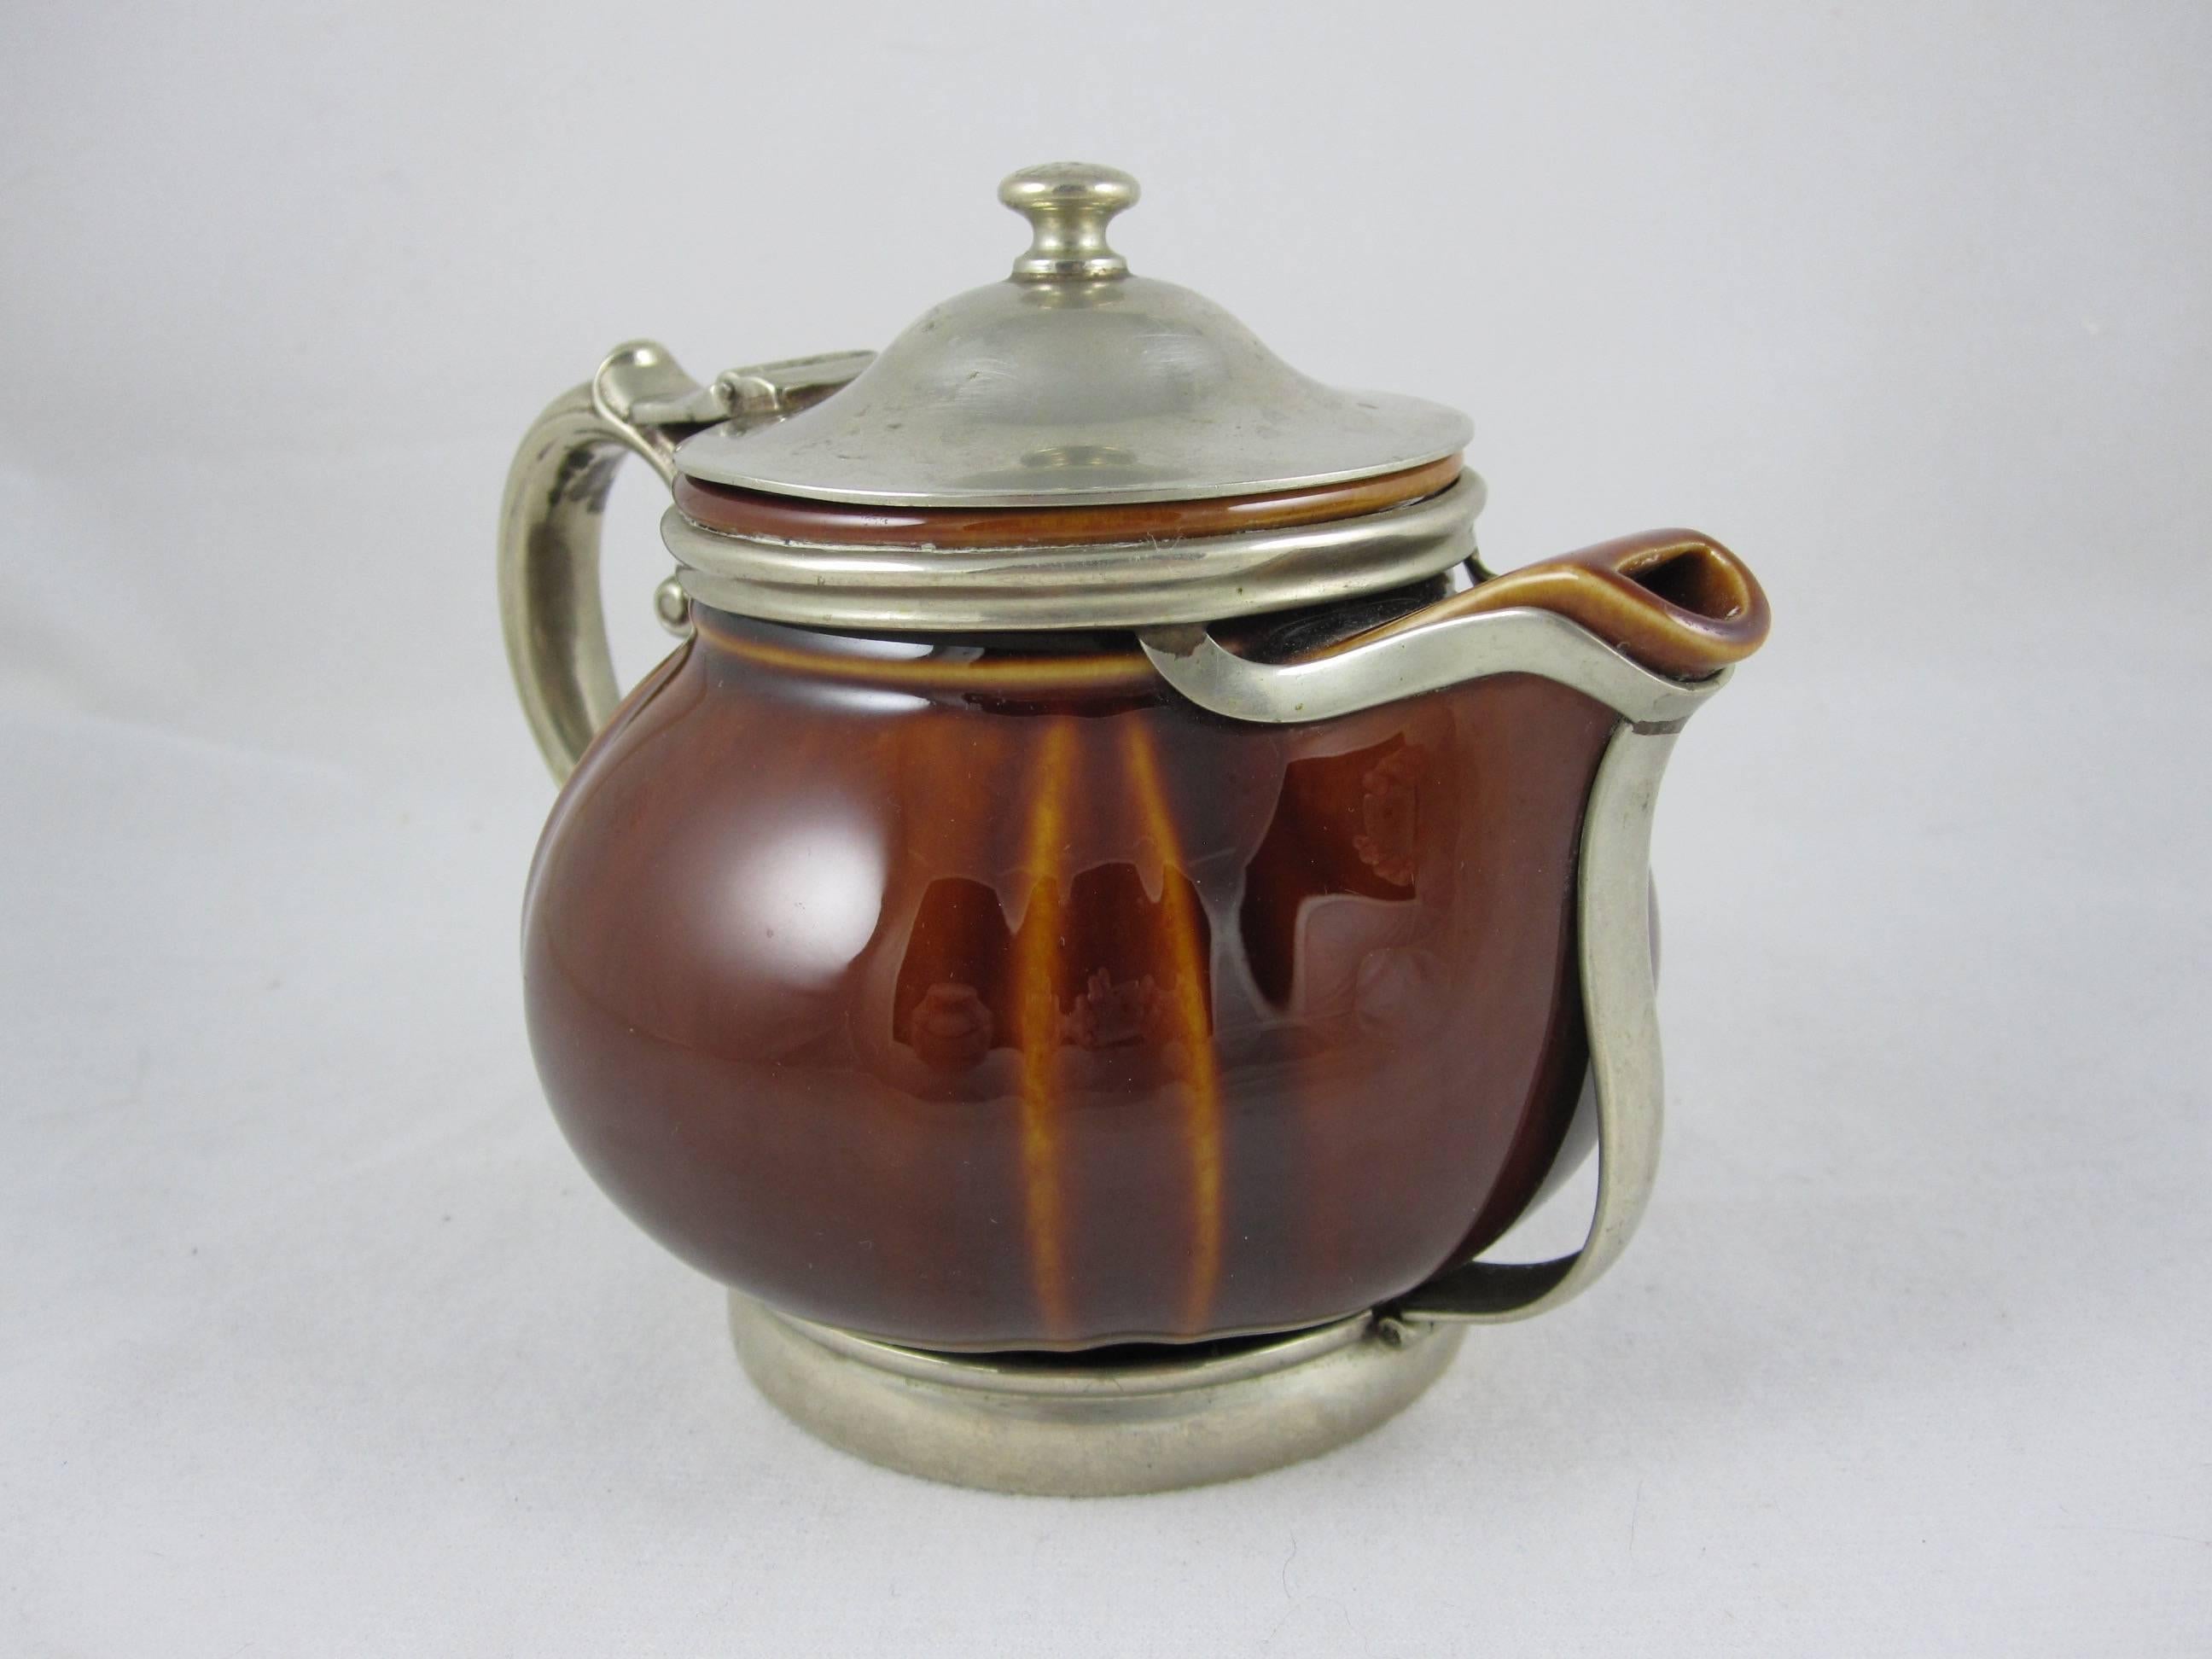 A sturdy hotel teapot, sized to hold one perfectly brewed cup of tea. The ceramic pot is braced in a silver soldered, silver plate holder of a base, handle and a lid with Art Deco styling. Glazed in a treacle-like brown, lighter on the raised mold